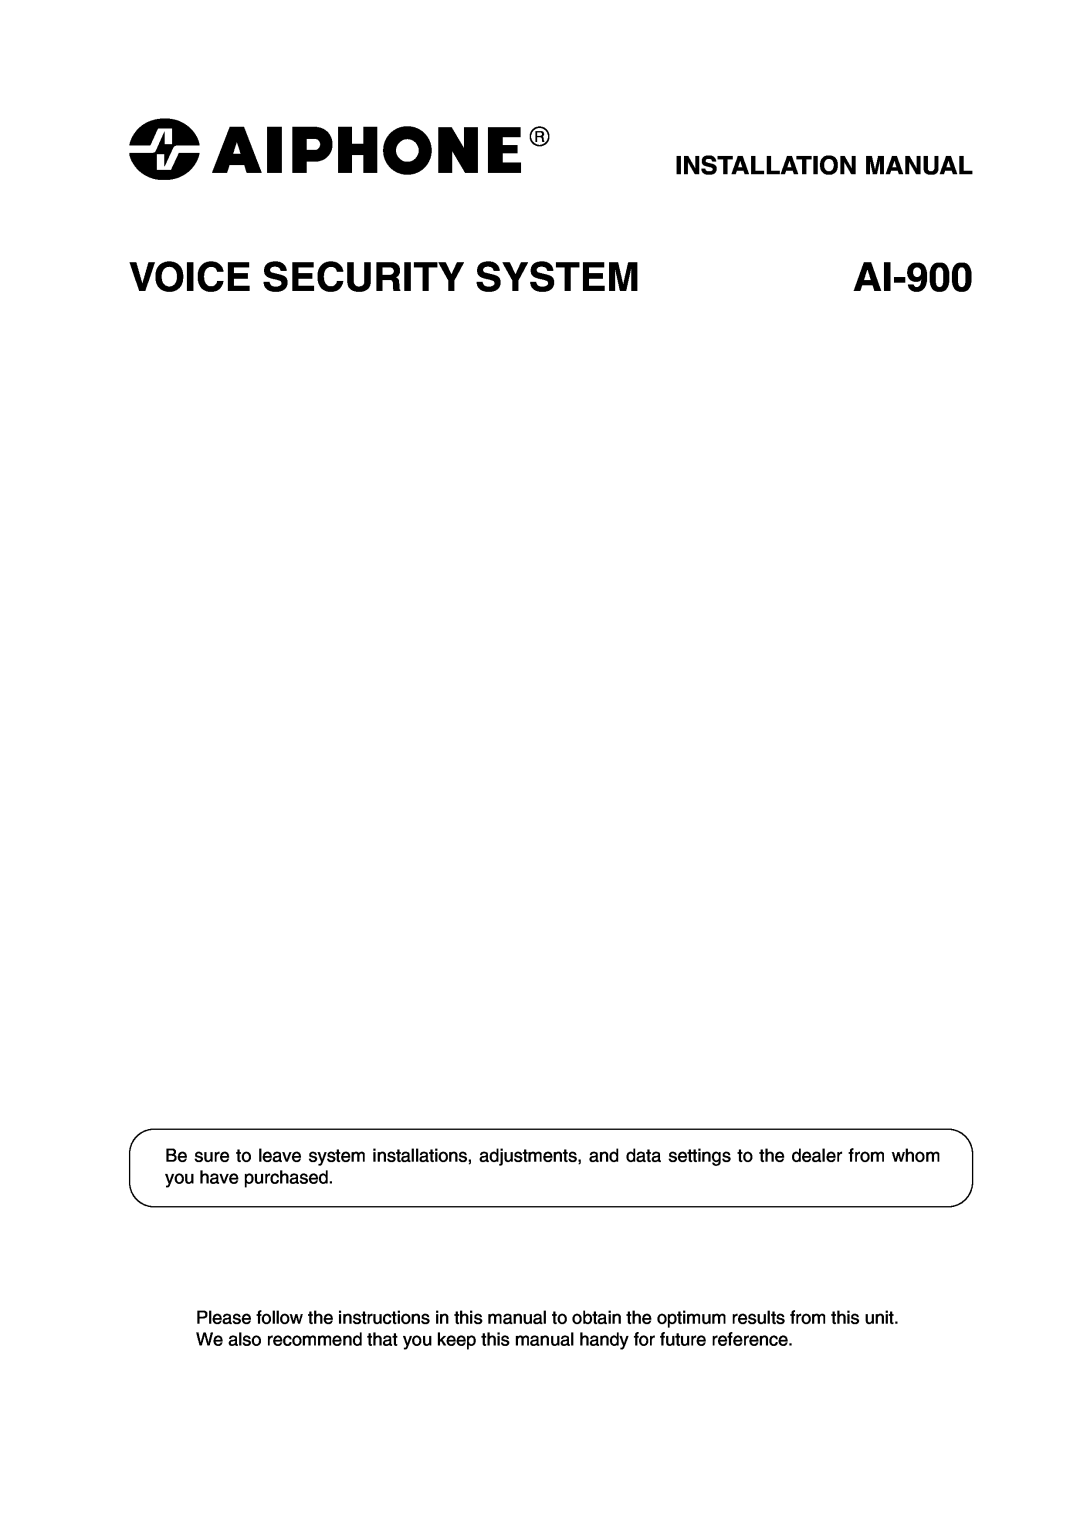 Aiphone AI-900 installation manual Installation Manual, Voice Security System 